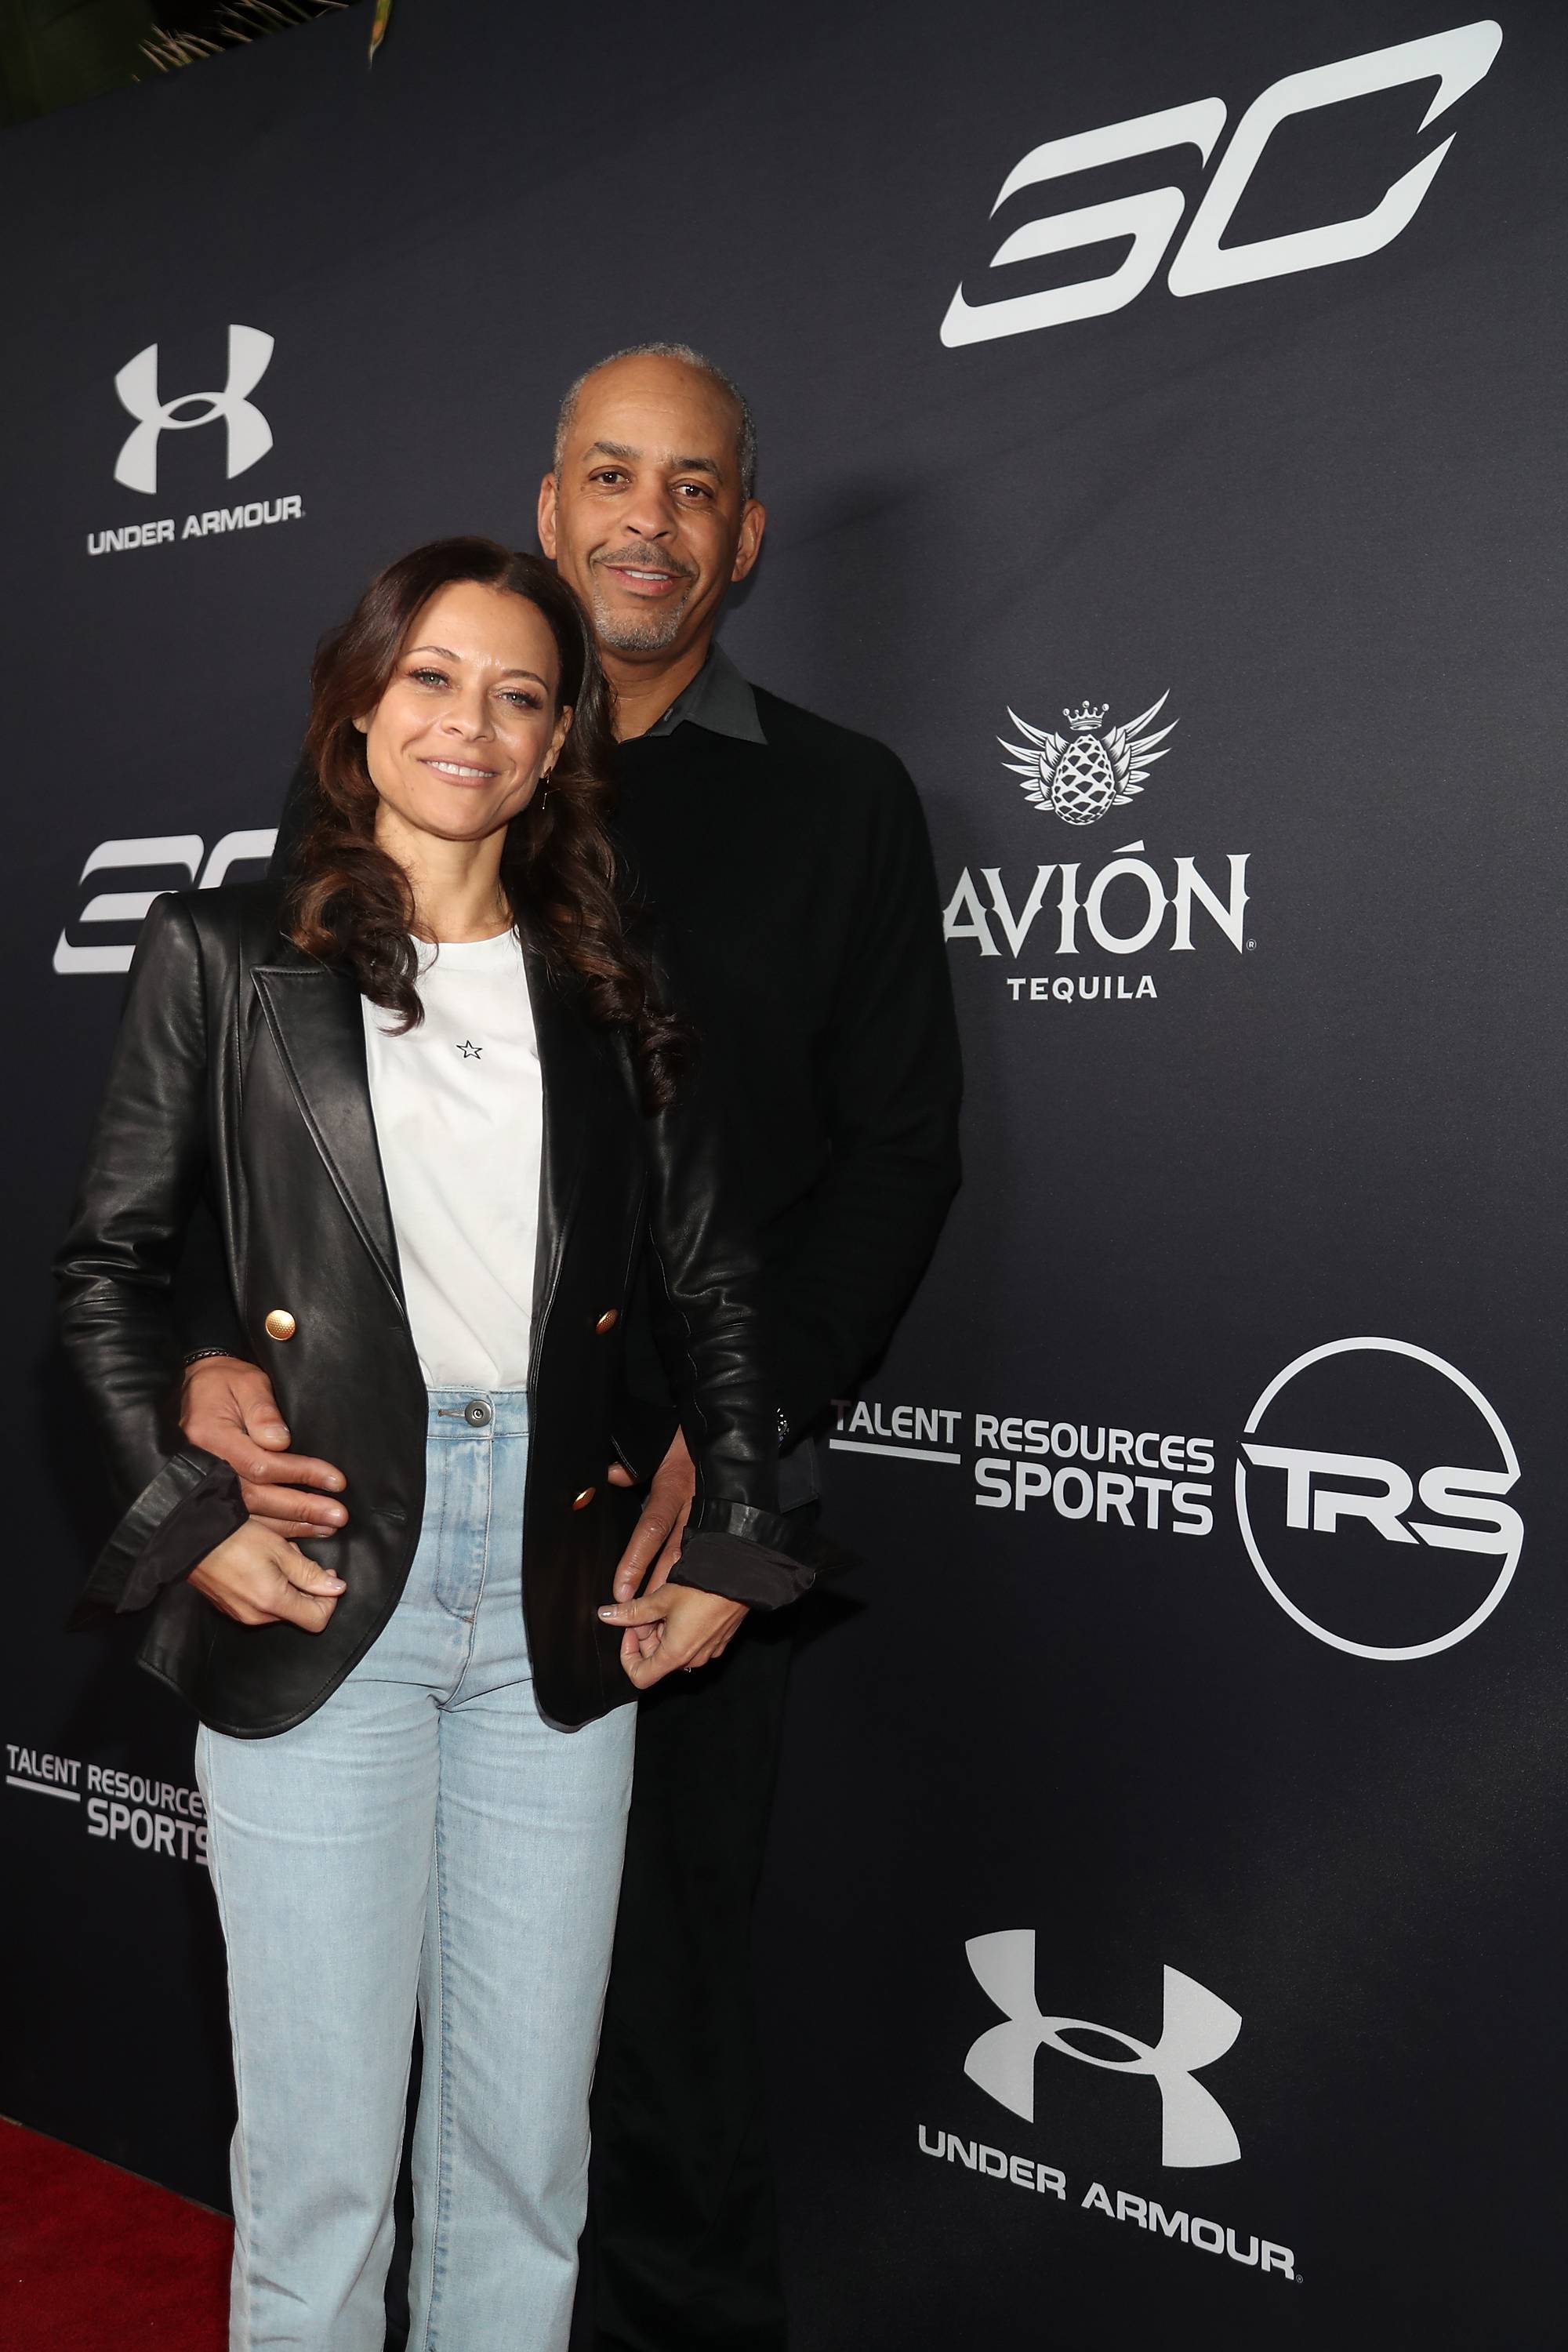 Stephen Curry's Parents Dell And Sonya Curry To Divorce After 33 Years Of  Marriage | News | BET